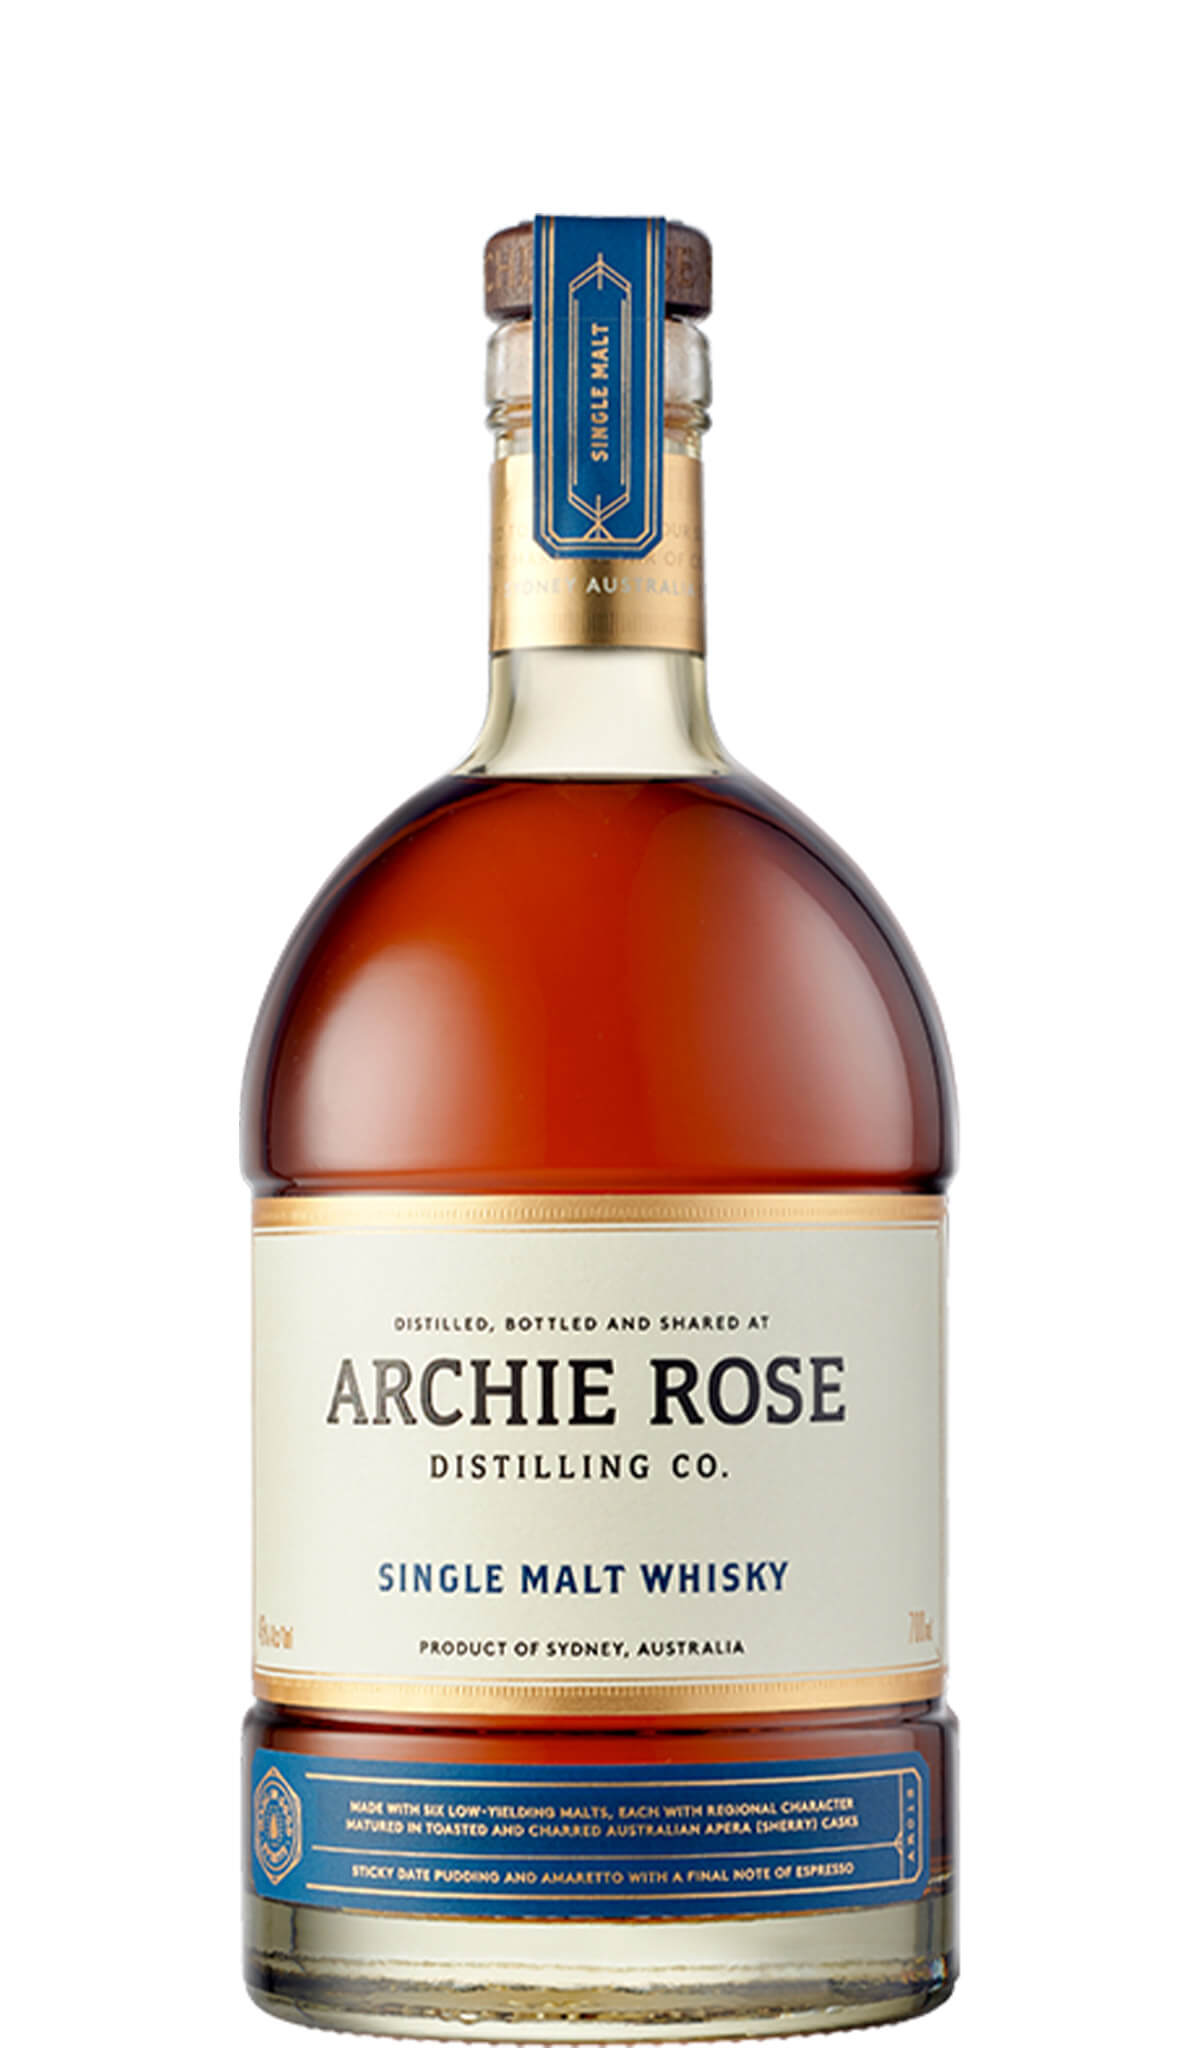 Find out more, explore the range and buy Archie Rose Single Malt Whisky 700mL available online at Wine Sellers Direct - Australia's independent liquor specialists.